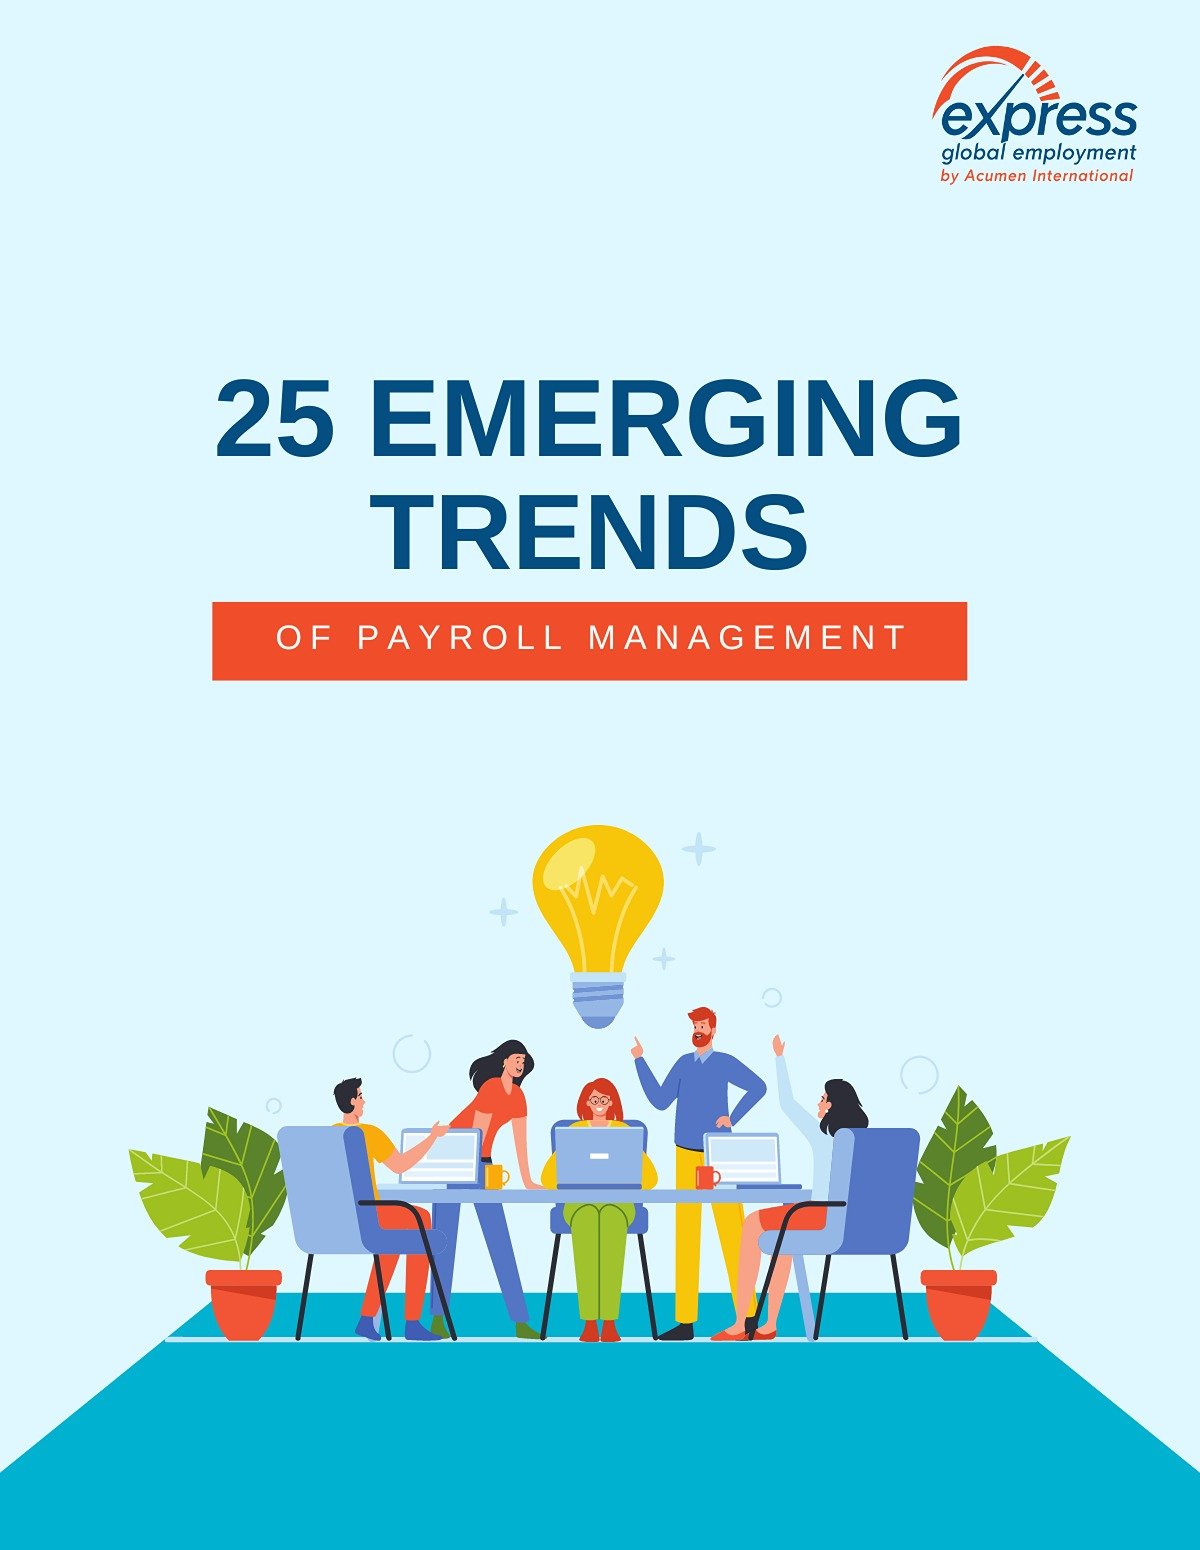 25 Emerging Trends of Payroll Management